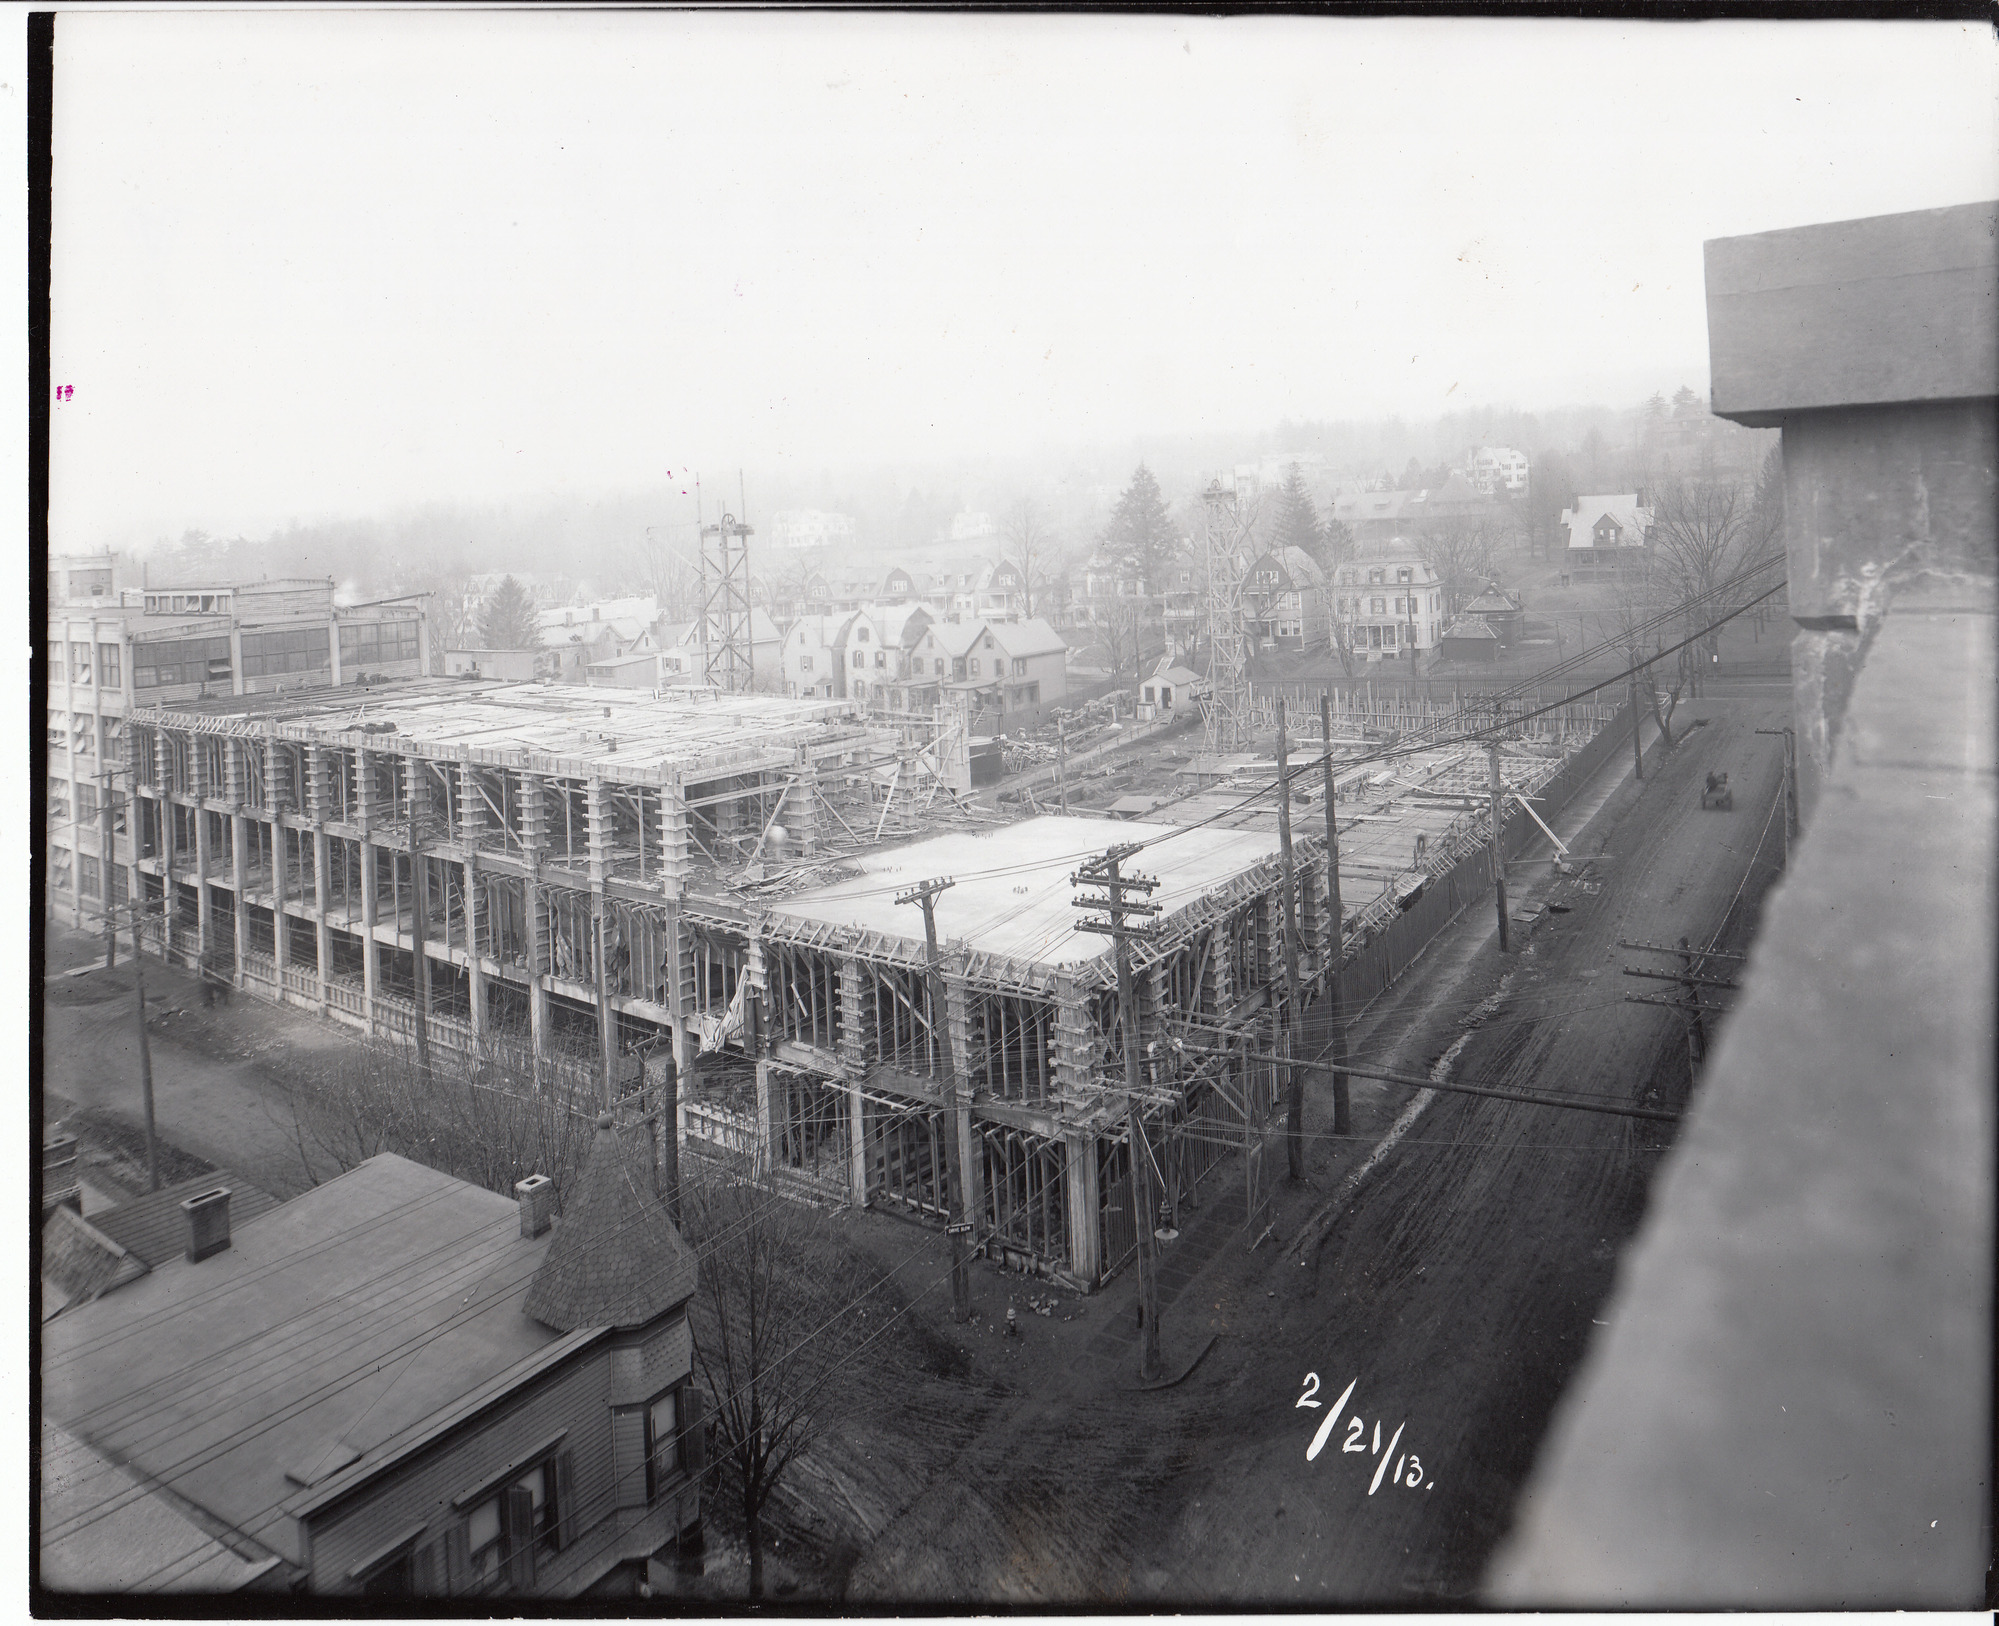 Storage Battery Building under construction, viewed from corner of Ashland Avenue, at left, and Lakeside Avenue.